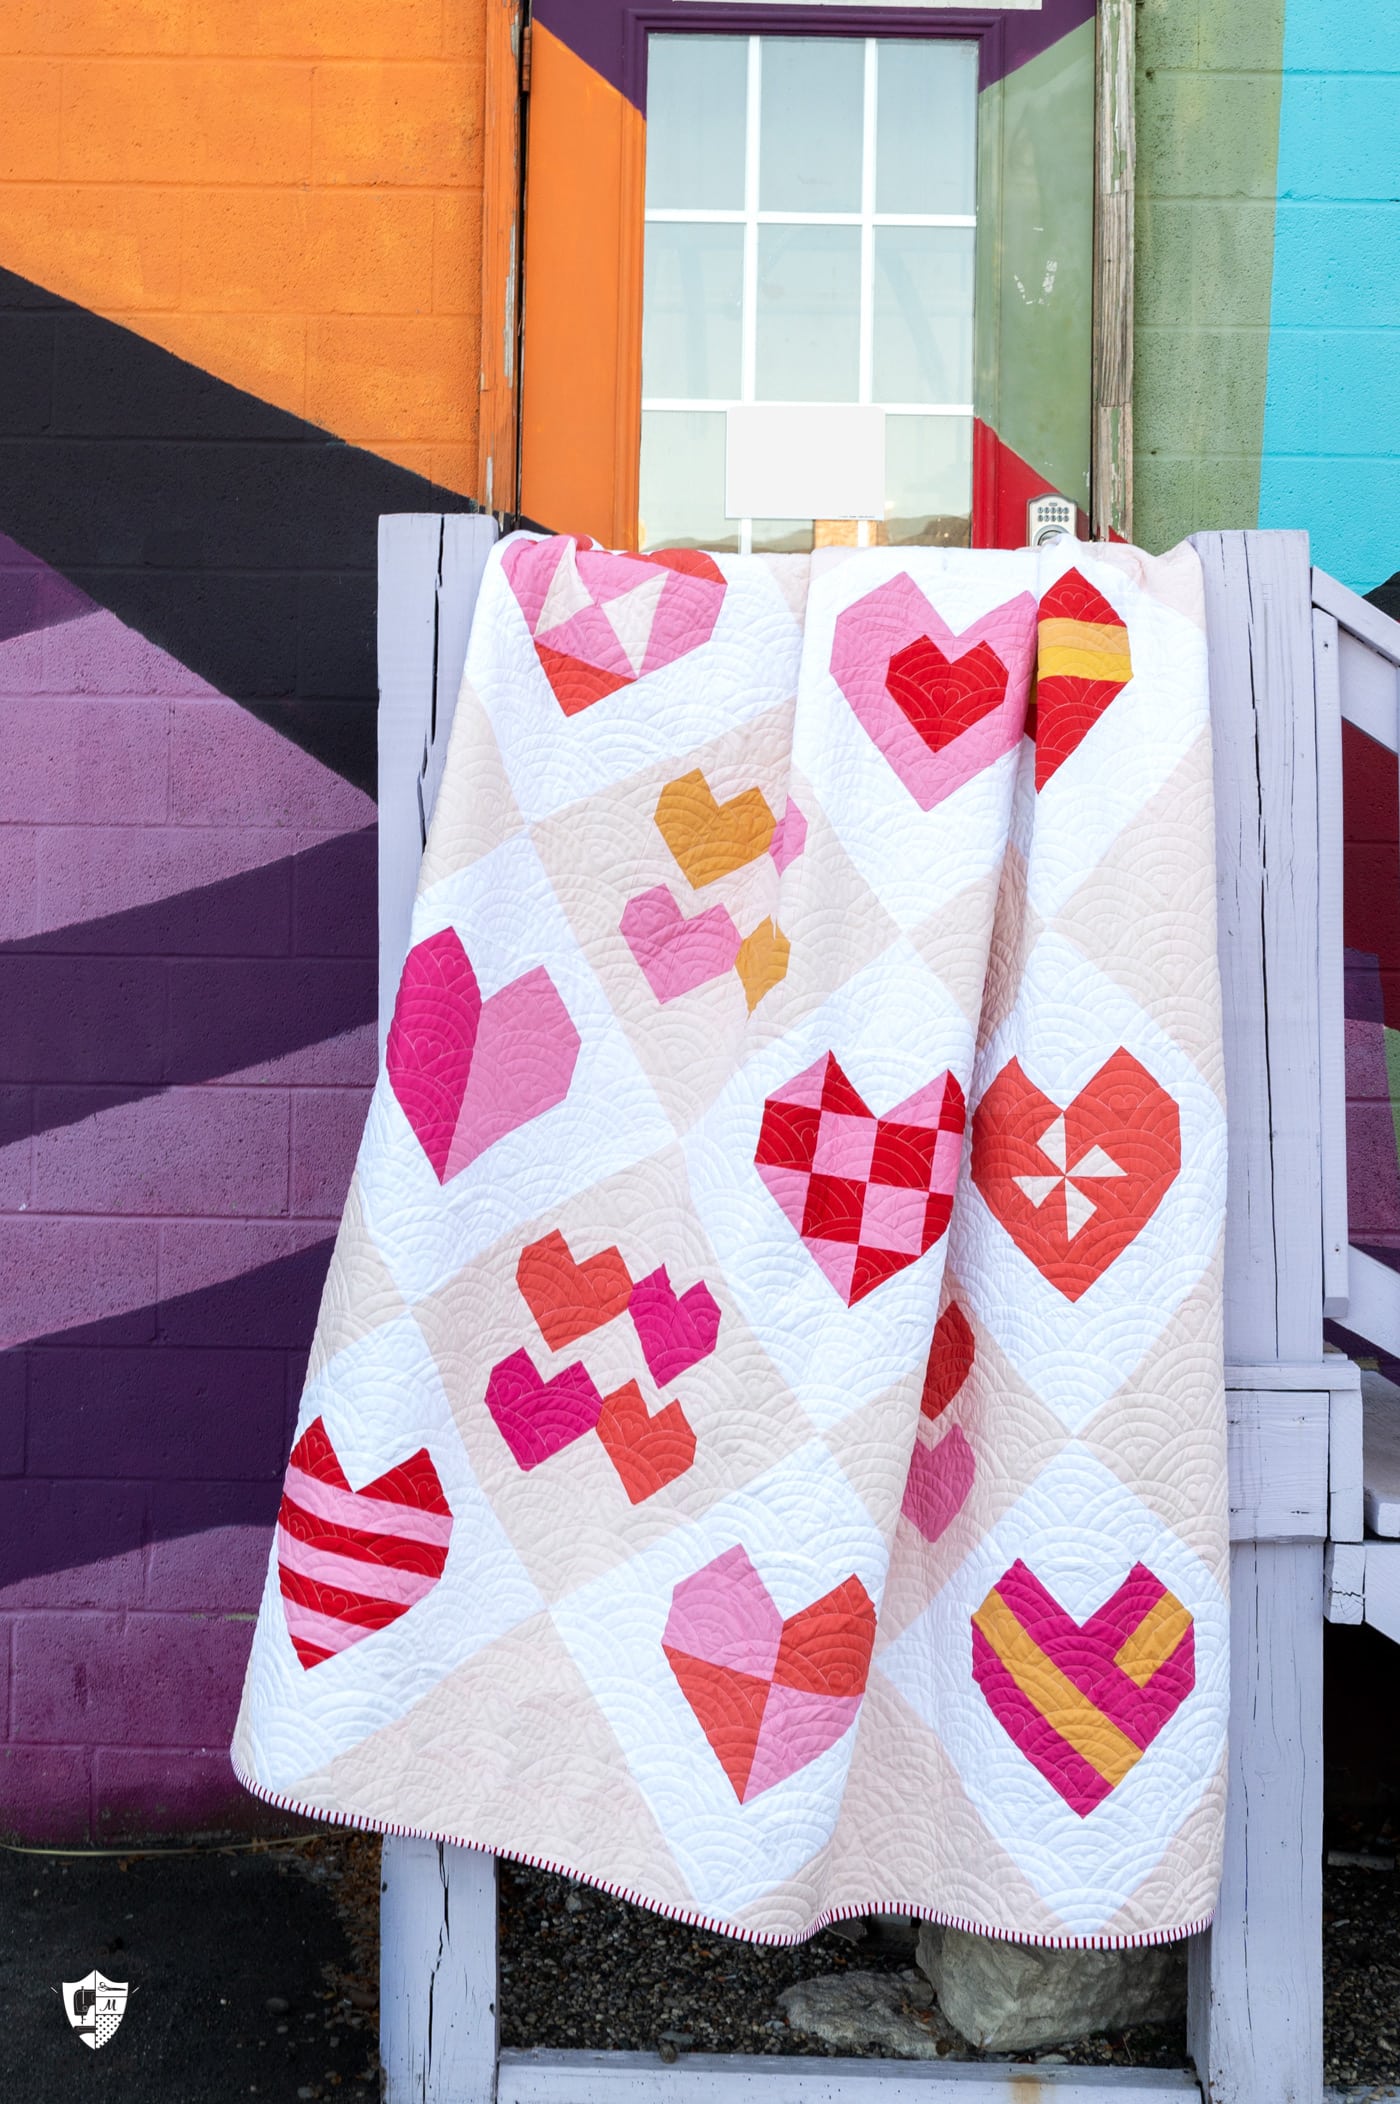 pink heart quilt in front of colorful wall on railing